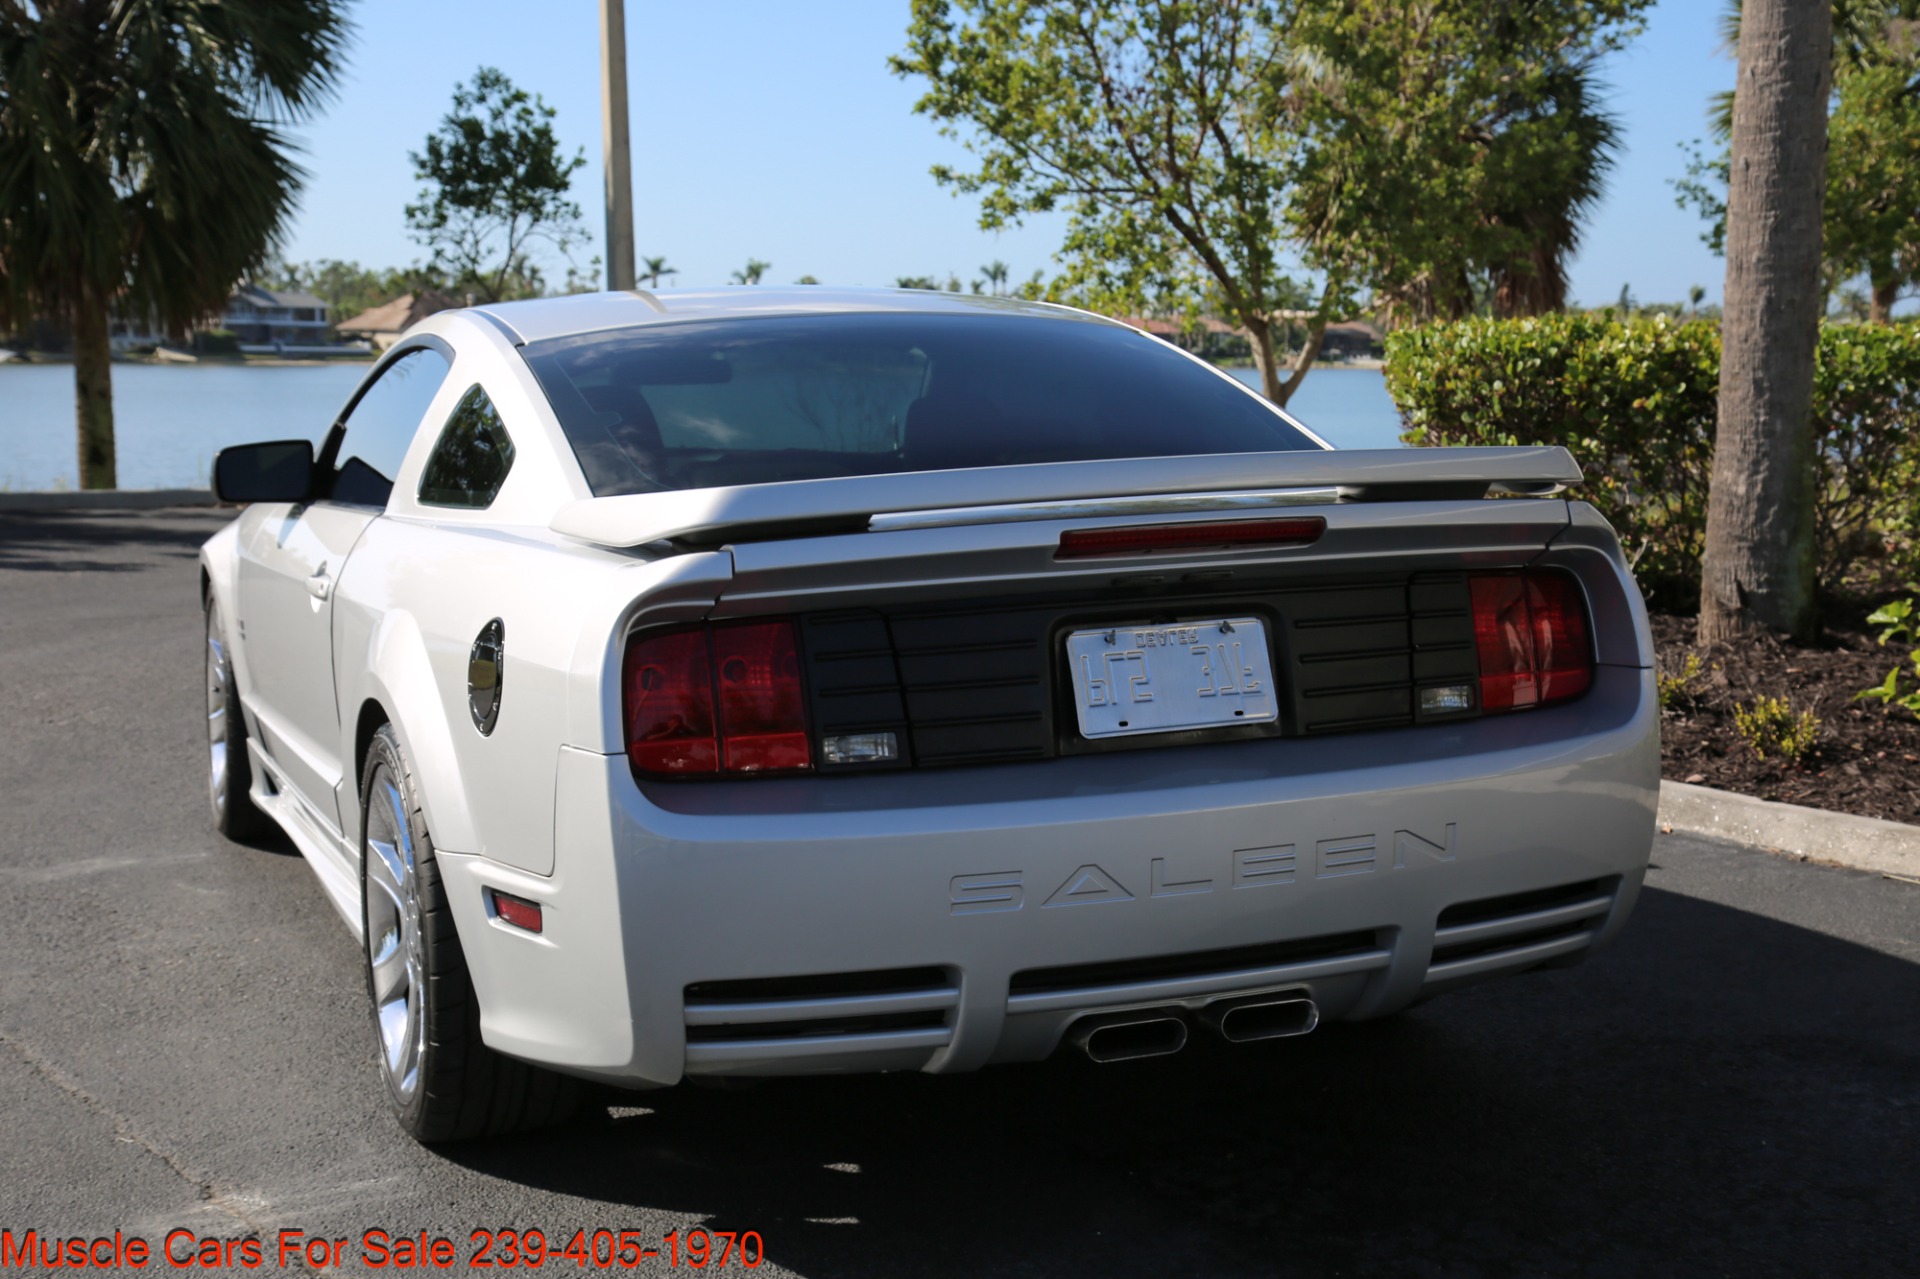 Used 2006 Ford Mustang Saleen Super Charged for sale Sold at Muscle Cars for Sale Inc. in Fort Myers FL 33912 7